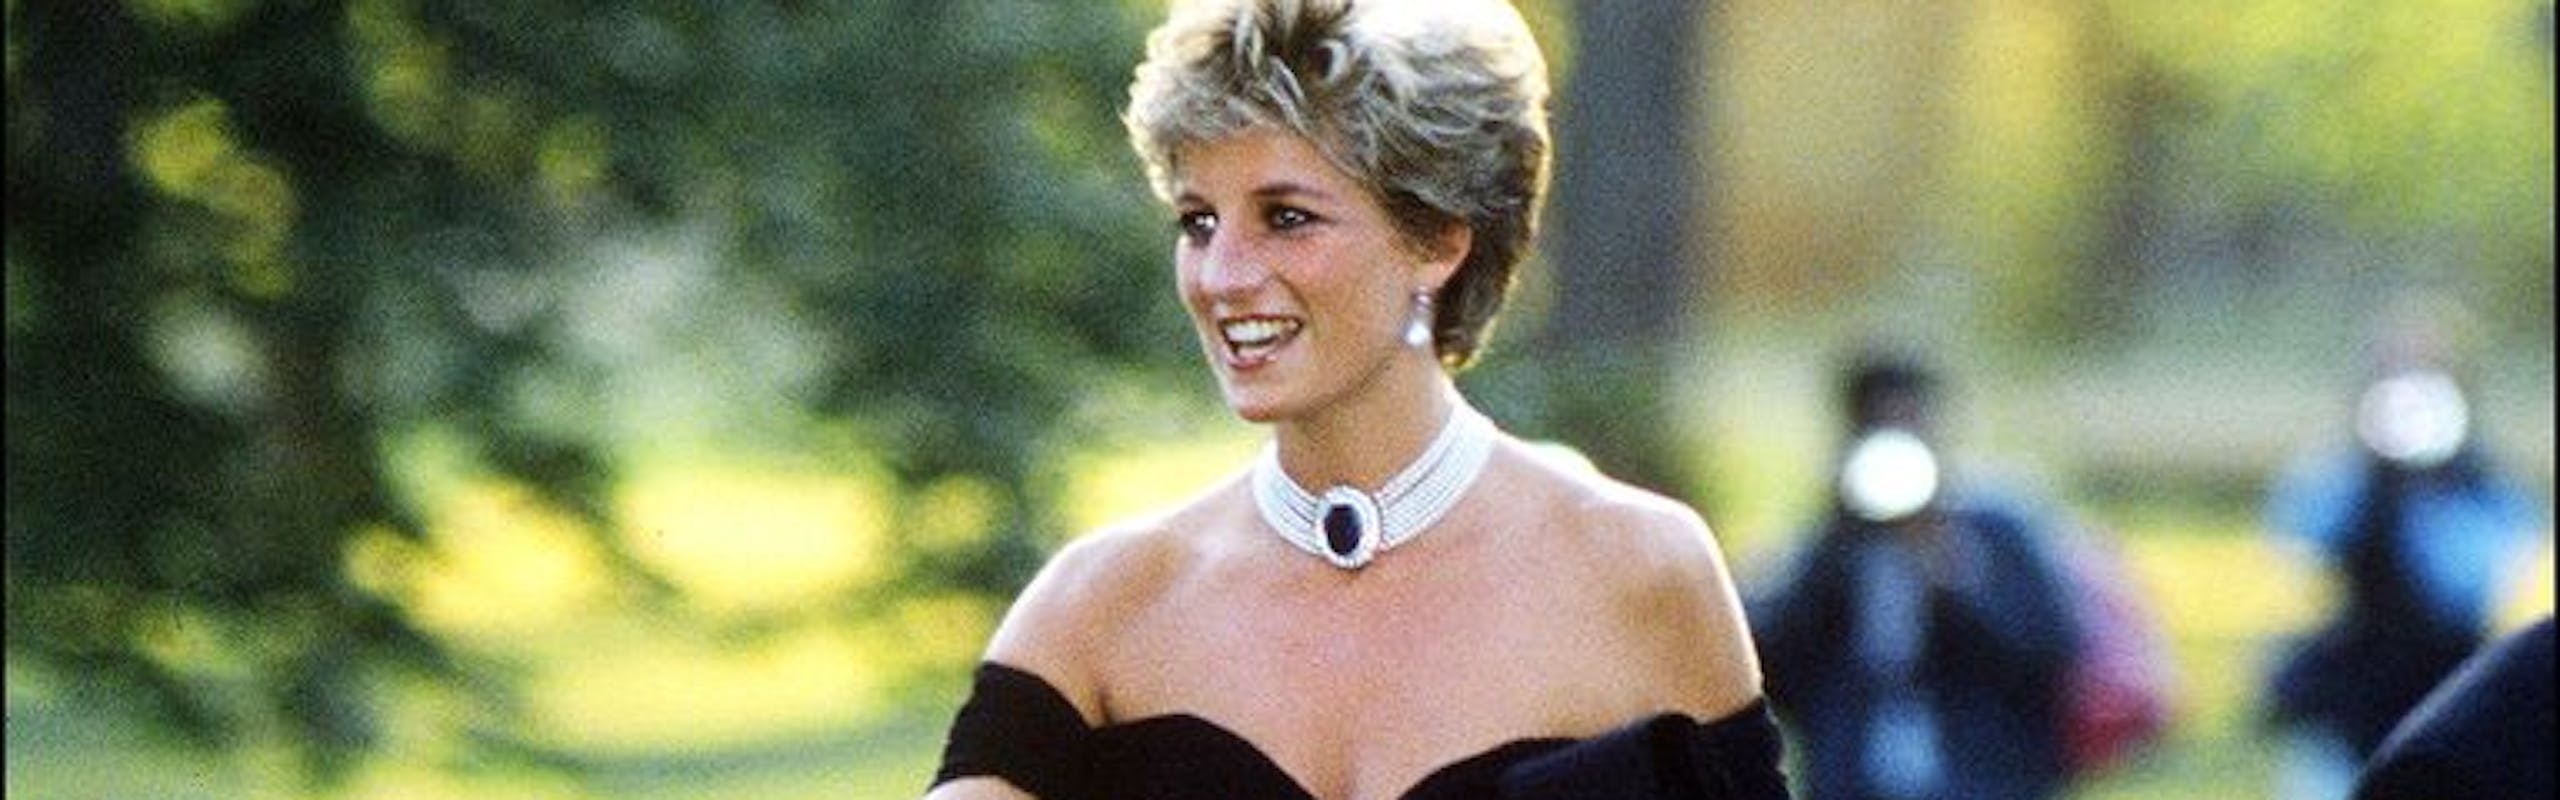 diana wears a stunning black gown post divorce from prince charles